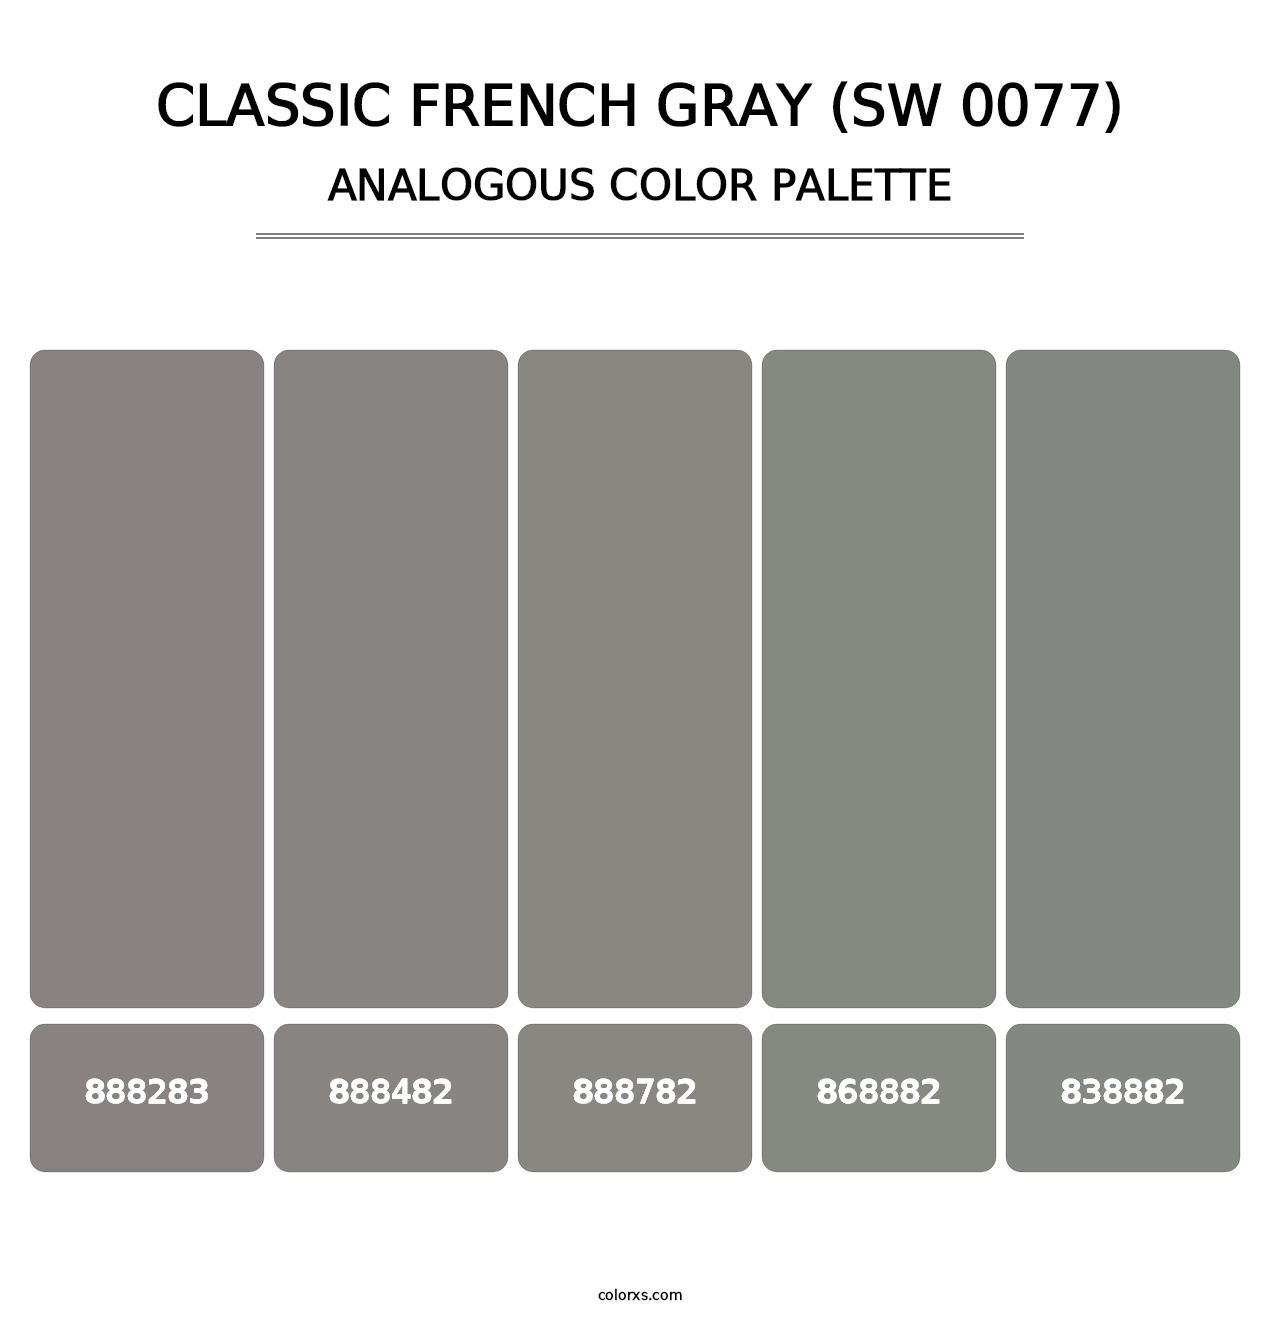 Classic French Gray (SW 0077) - Analogous Color Palette